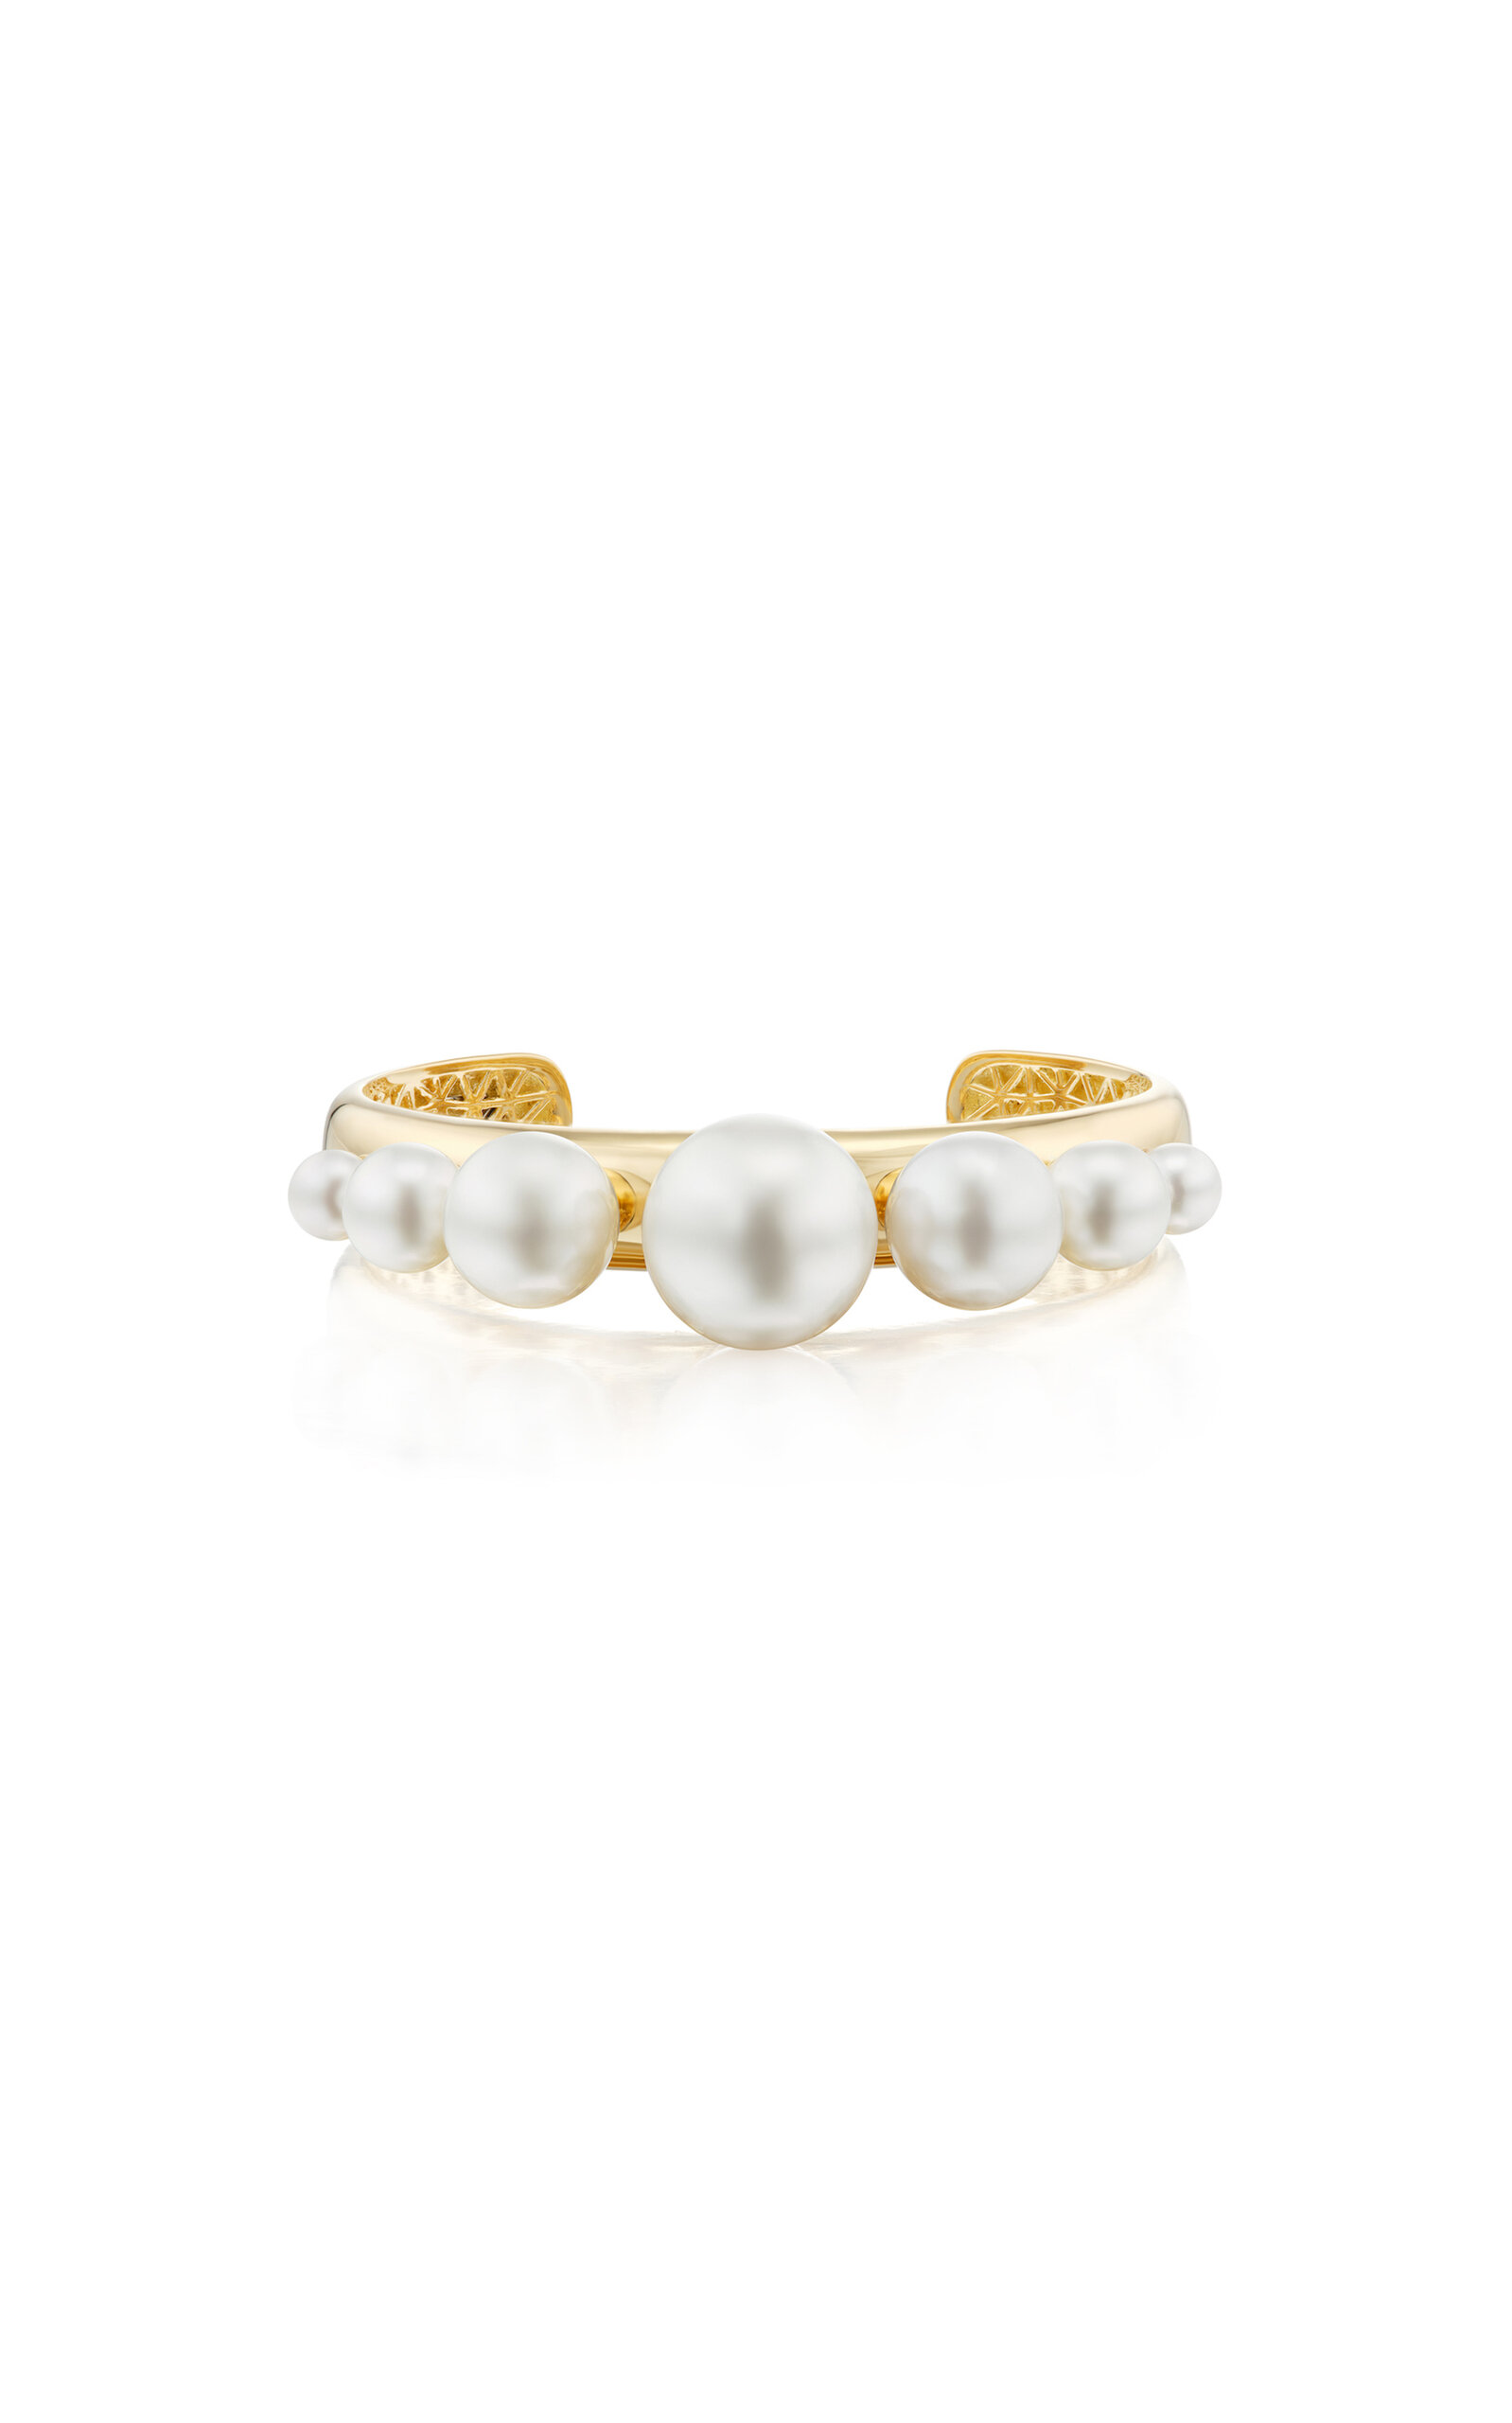 One-of-a-Kind 18K Yellow Gold Pearl Cuff